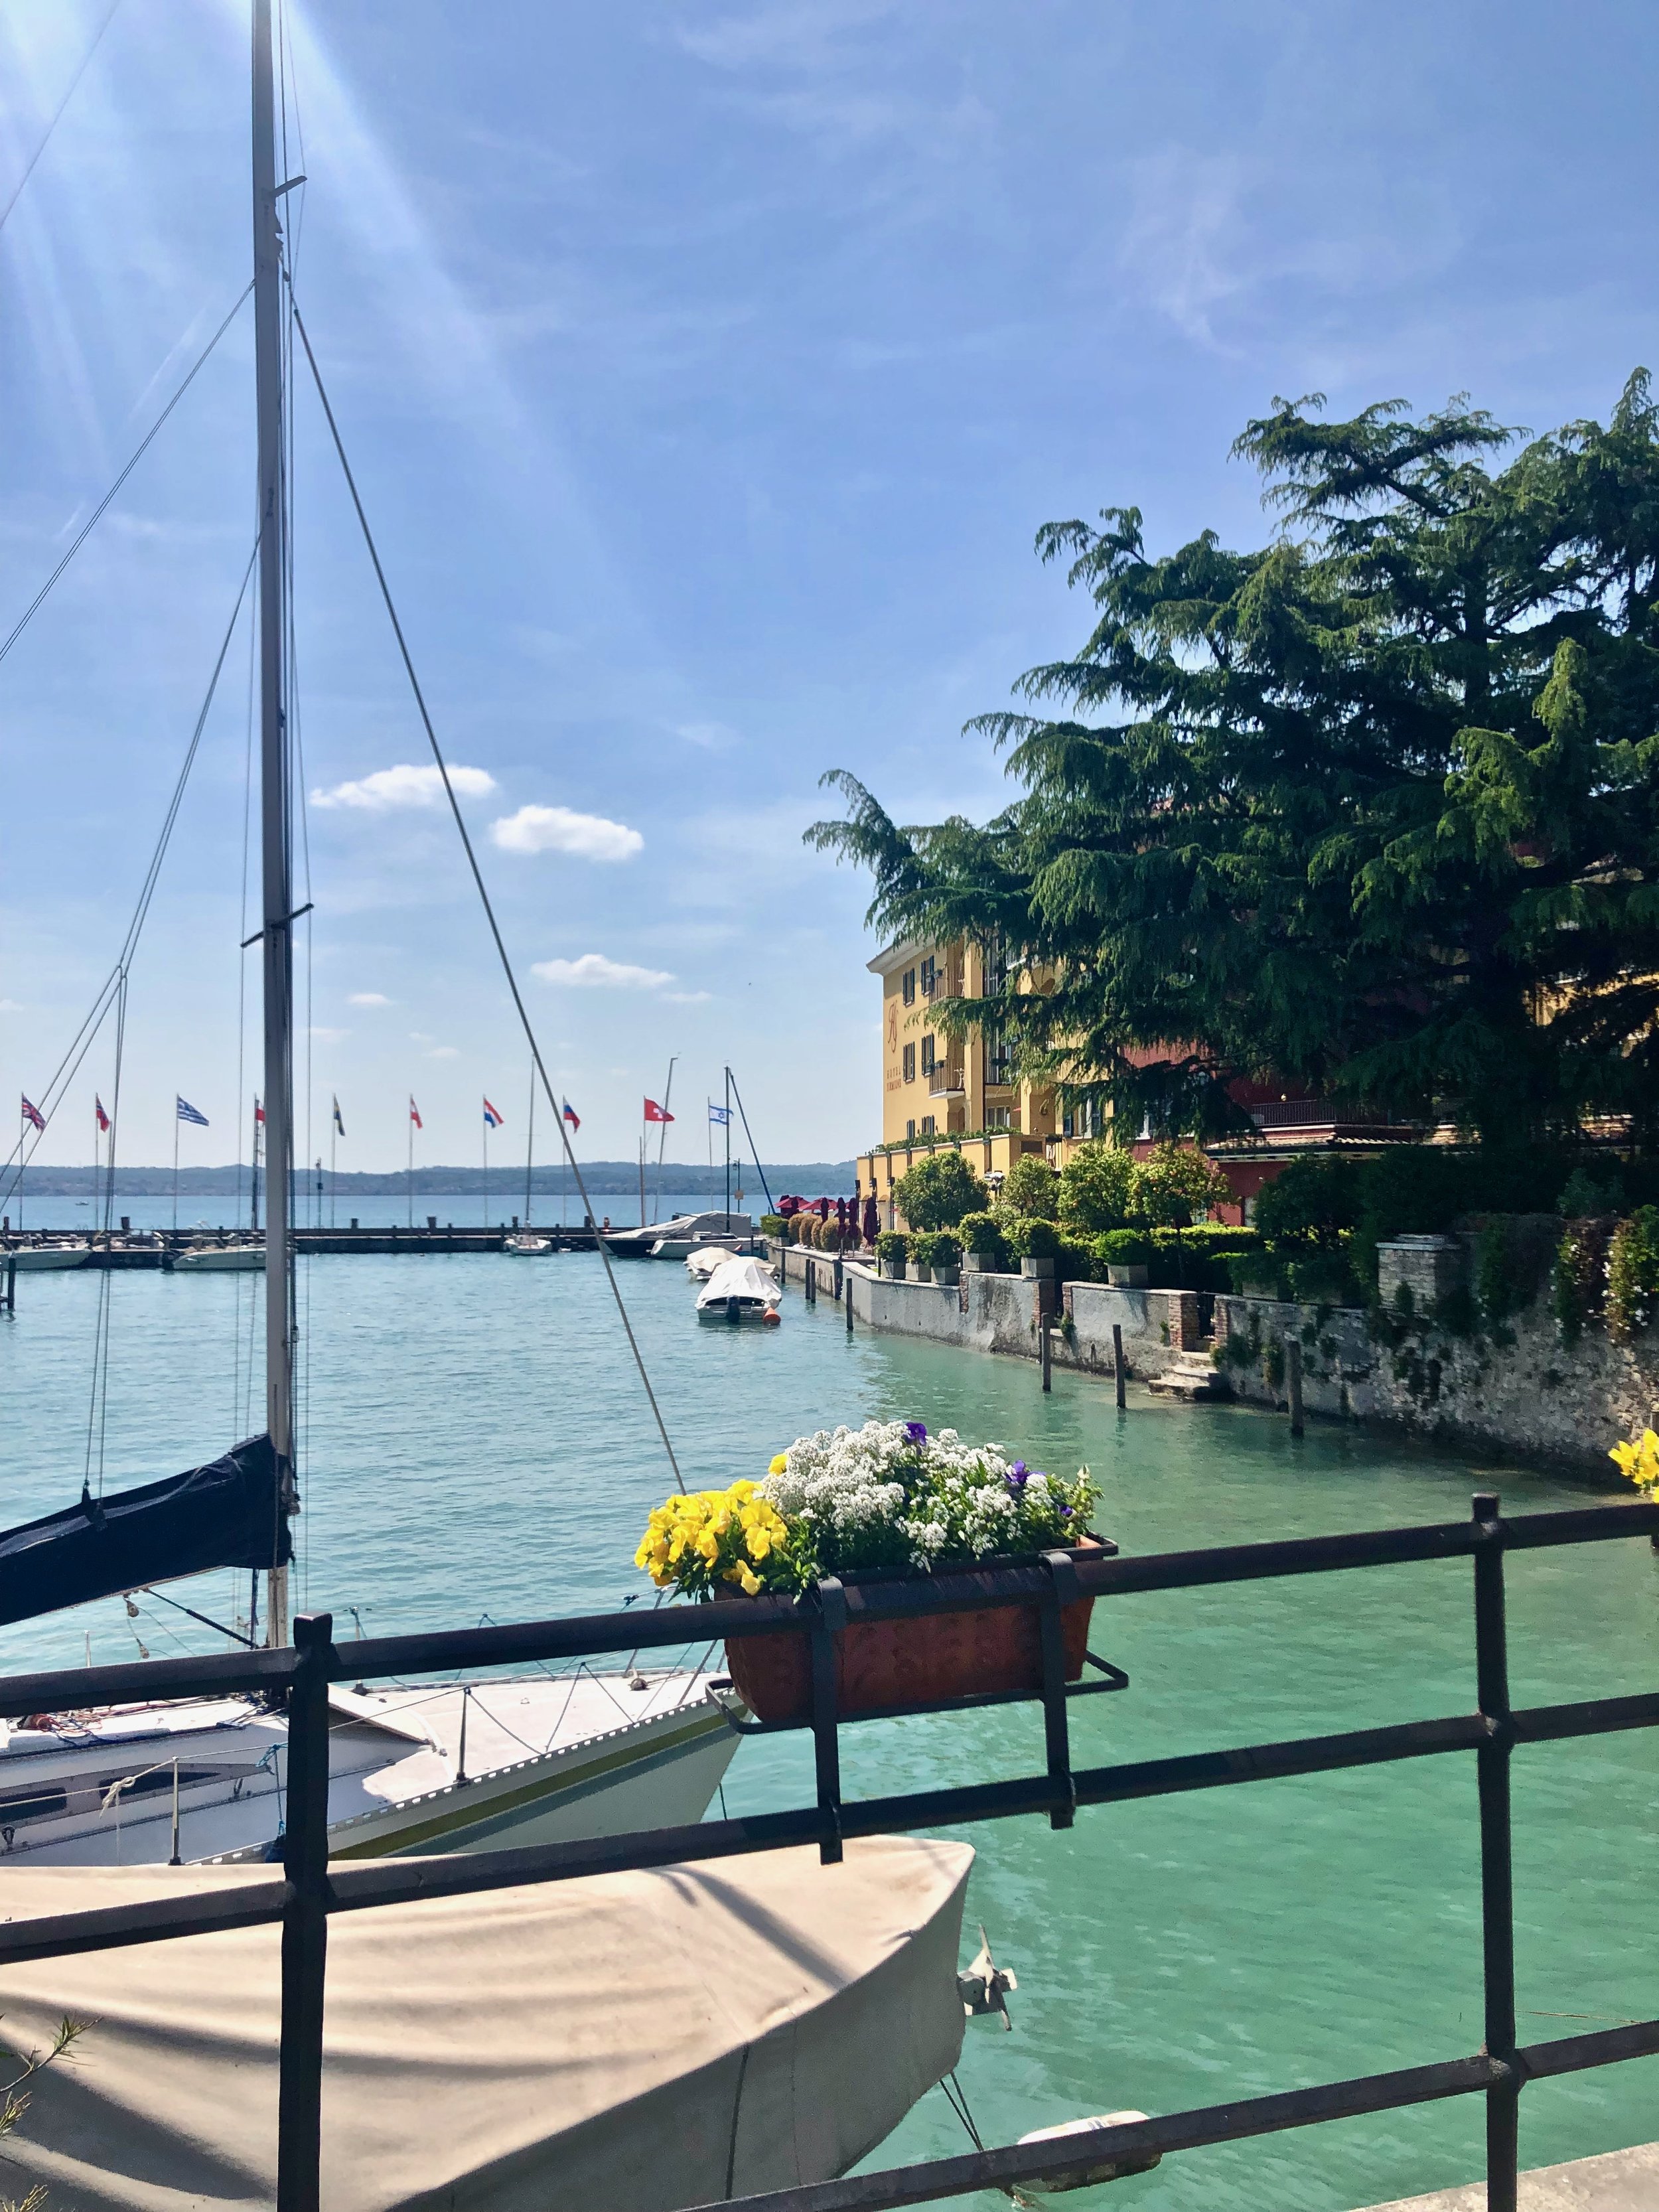 Sirmione S Aquaria Thermal Spa Ultimate Relaxation And Views On Lake Garda Sarah Freia